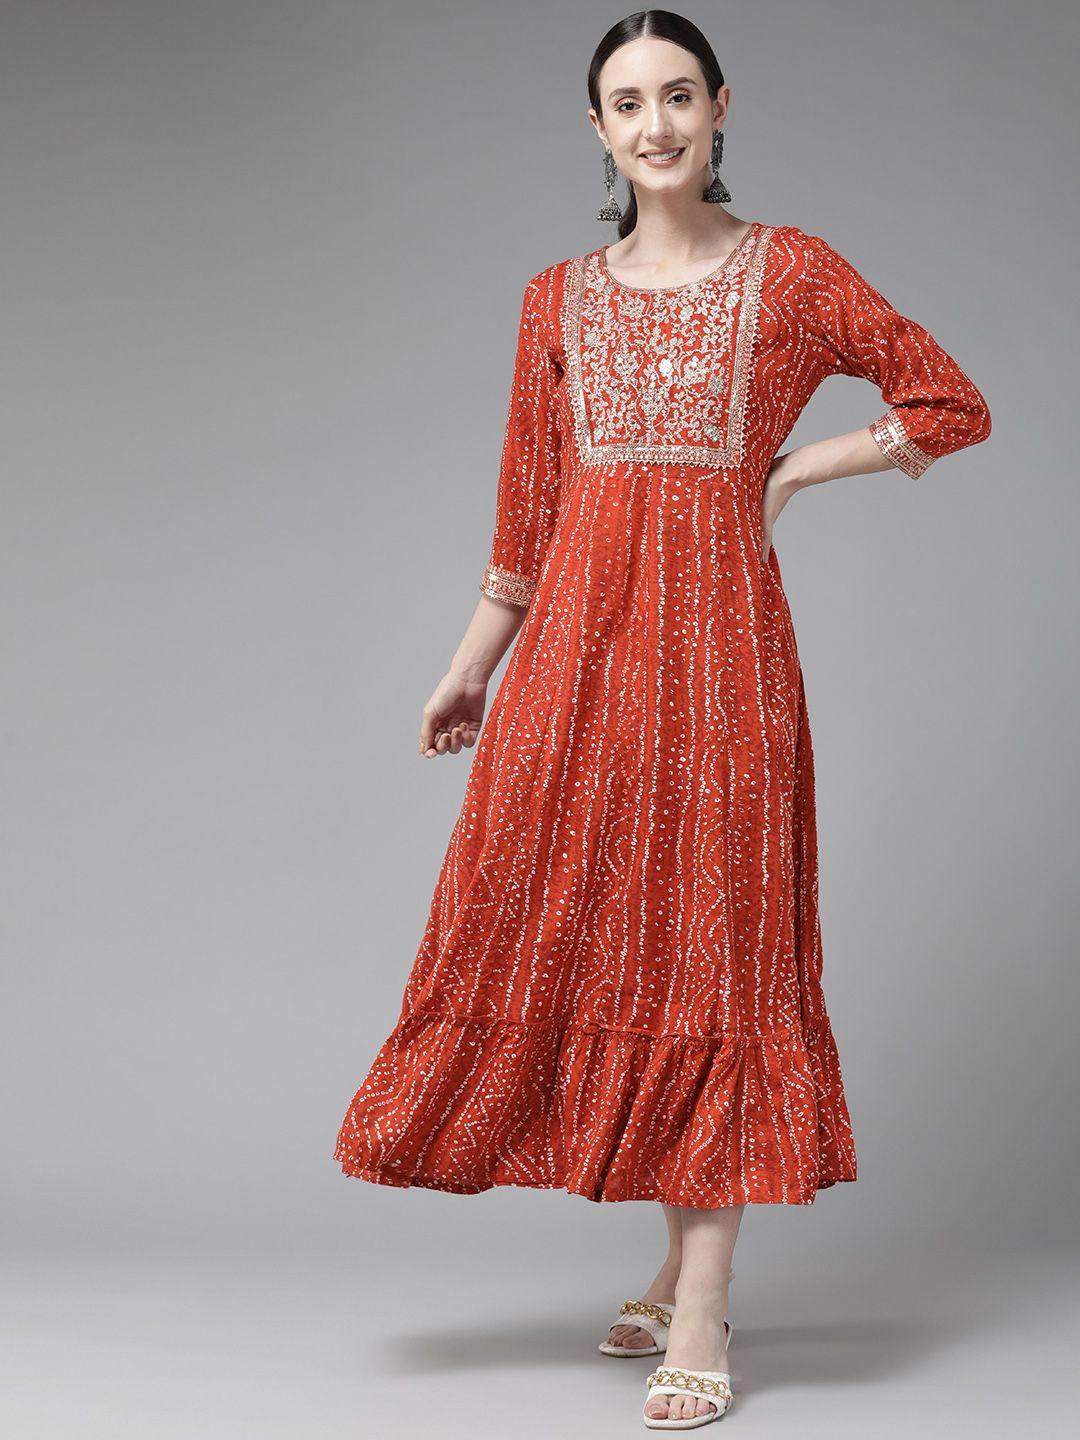 Yufta Red Ethnic Motifs Embroidered Ethnic A-Line Midi Dress Price in India